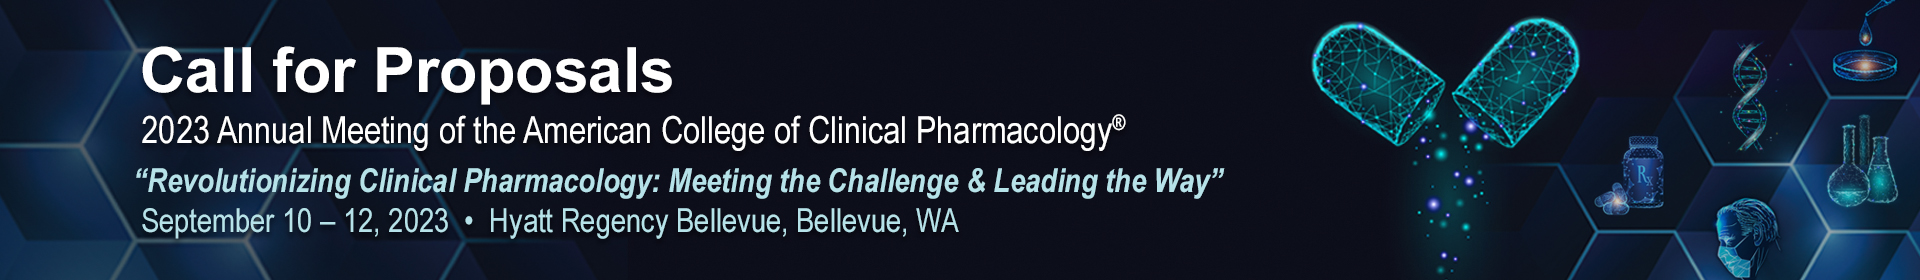 2023 Call for Proposals | American College of Clinical Pharmacology Annual Meeting | September 10 - 12, 2023